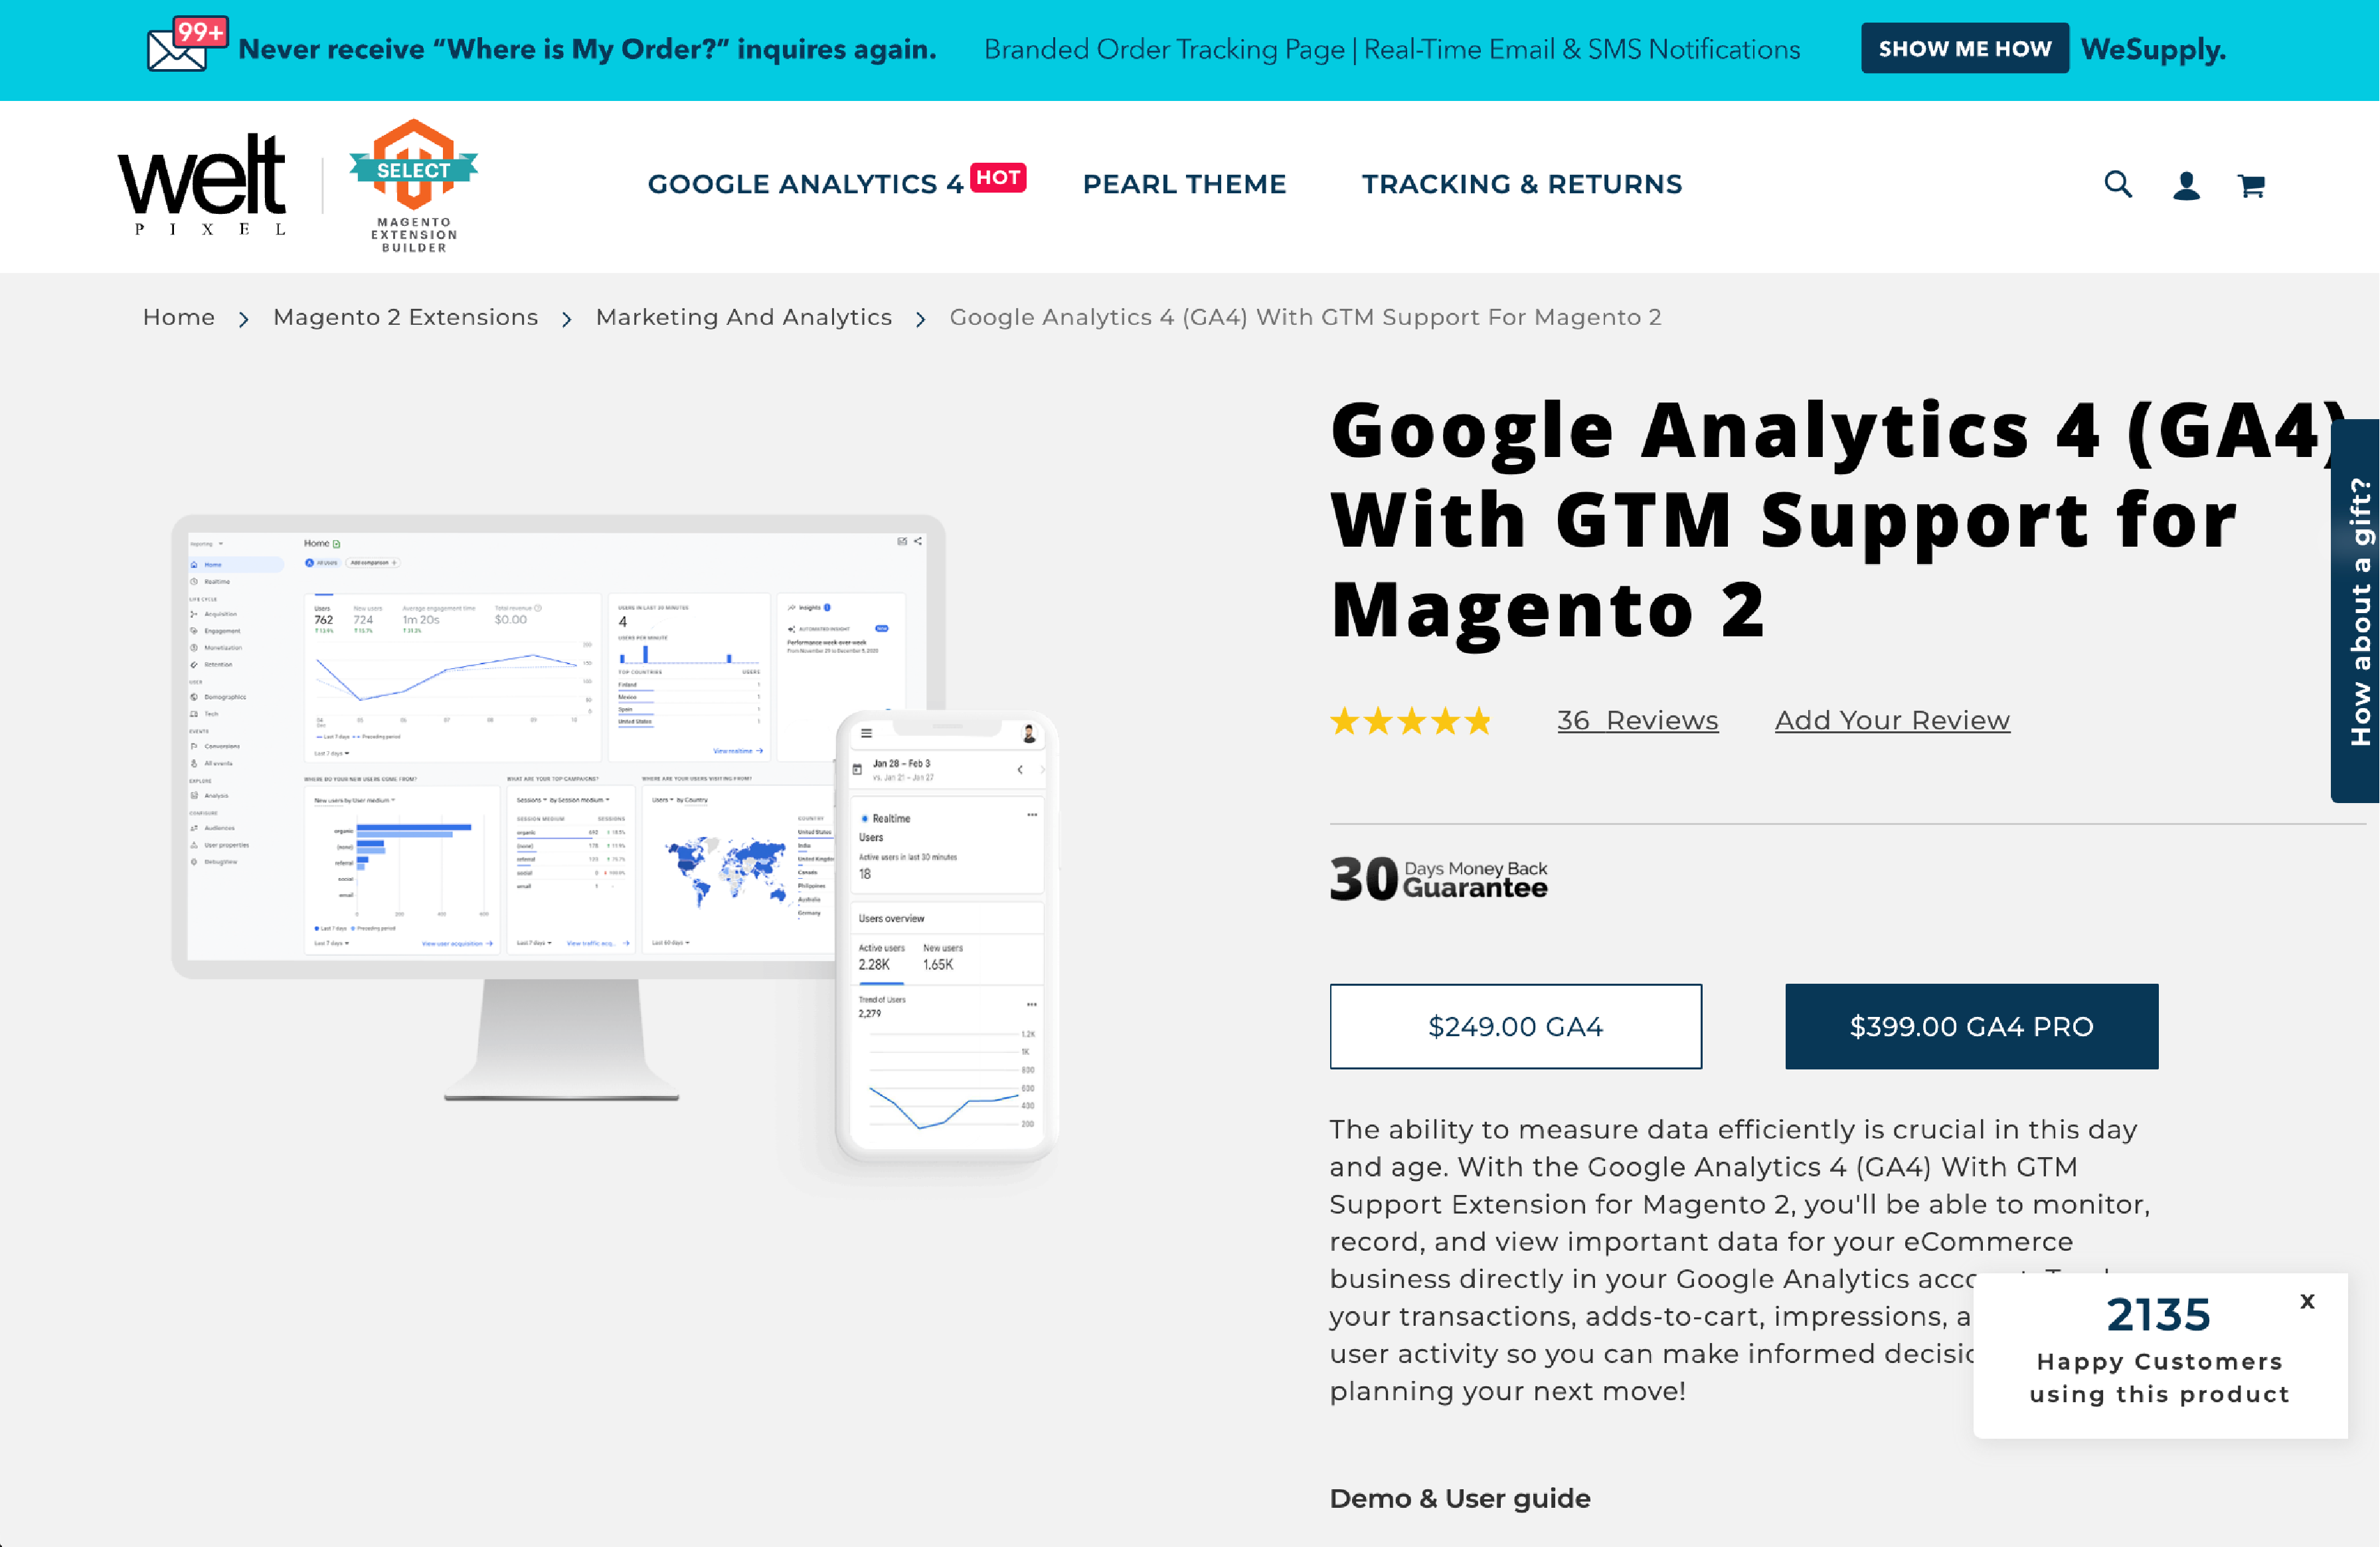 Google Analytics 4 with GTM Support for Magento 2, enabling enhanced tracking and marketing reports